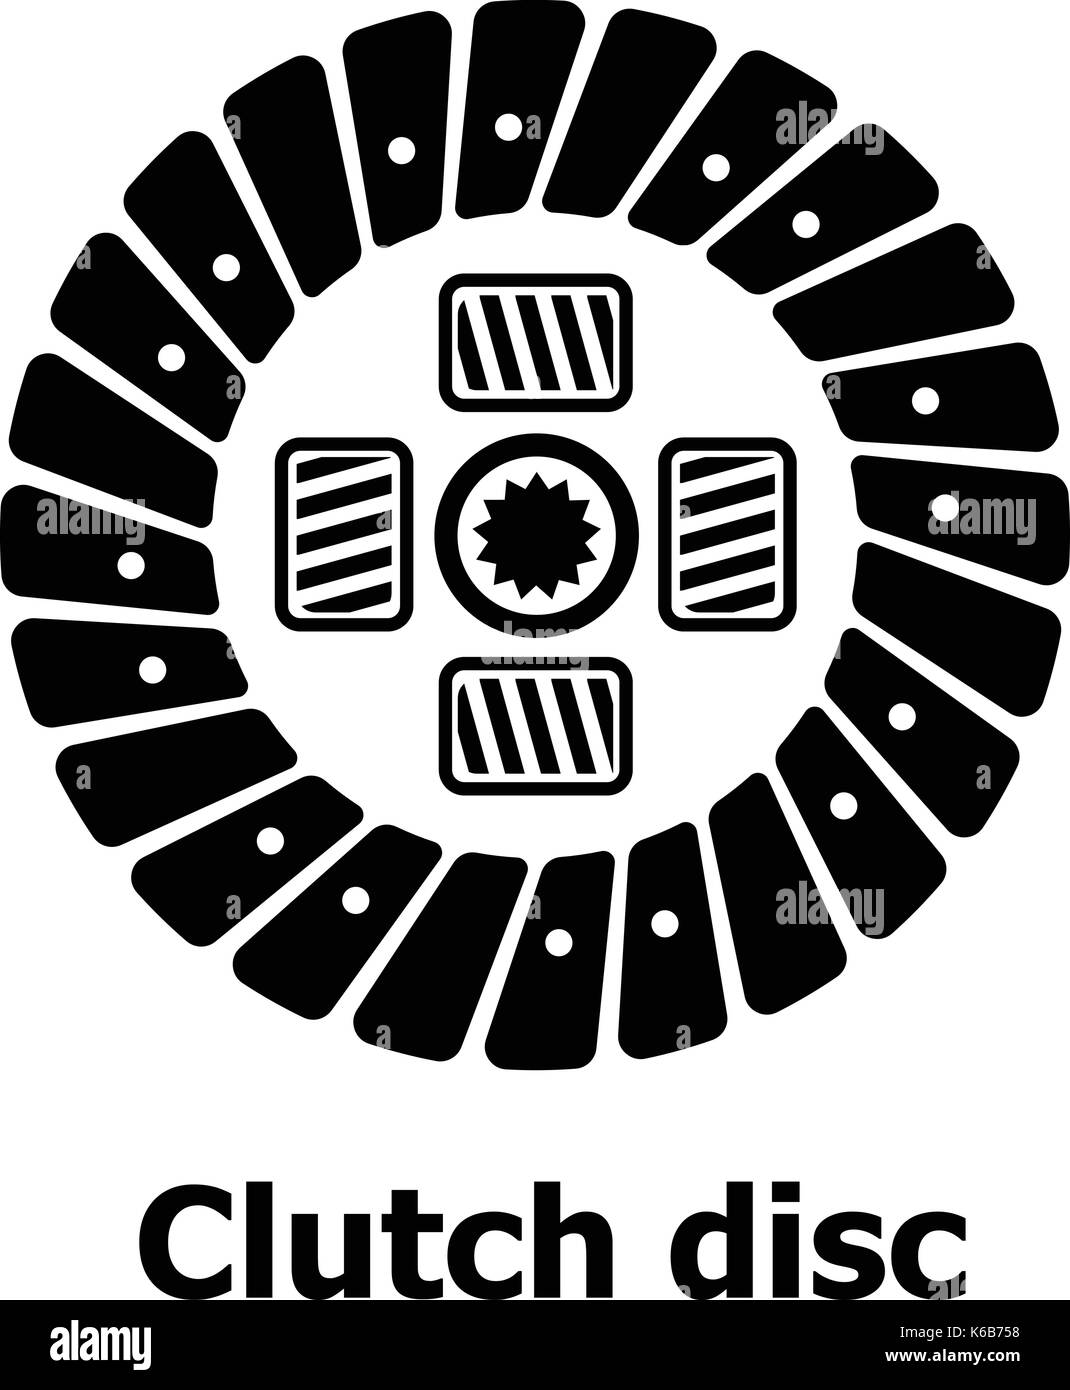 Clutch disc icon, simple black style Stock Vector